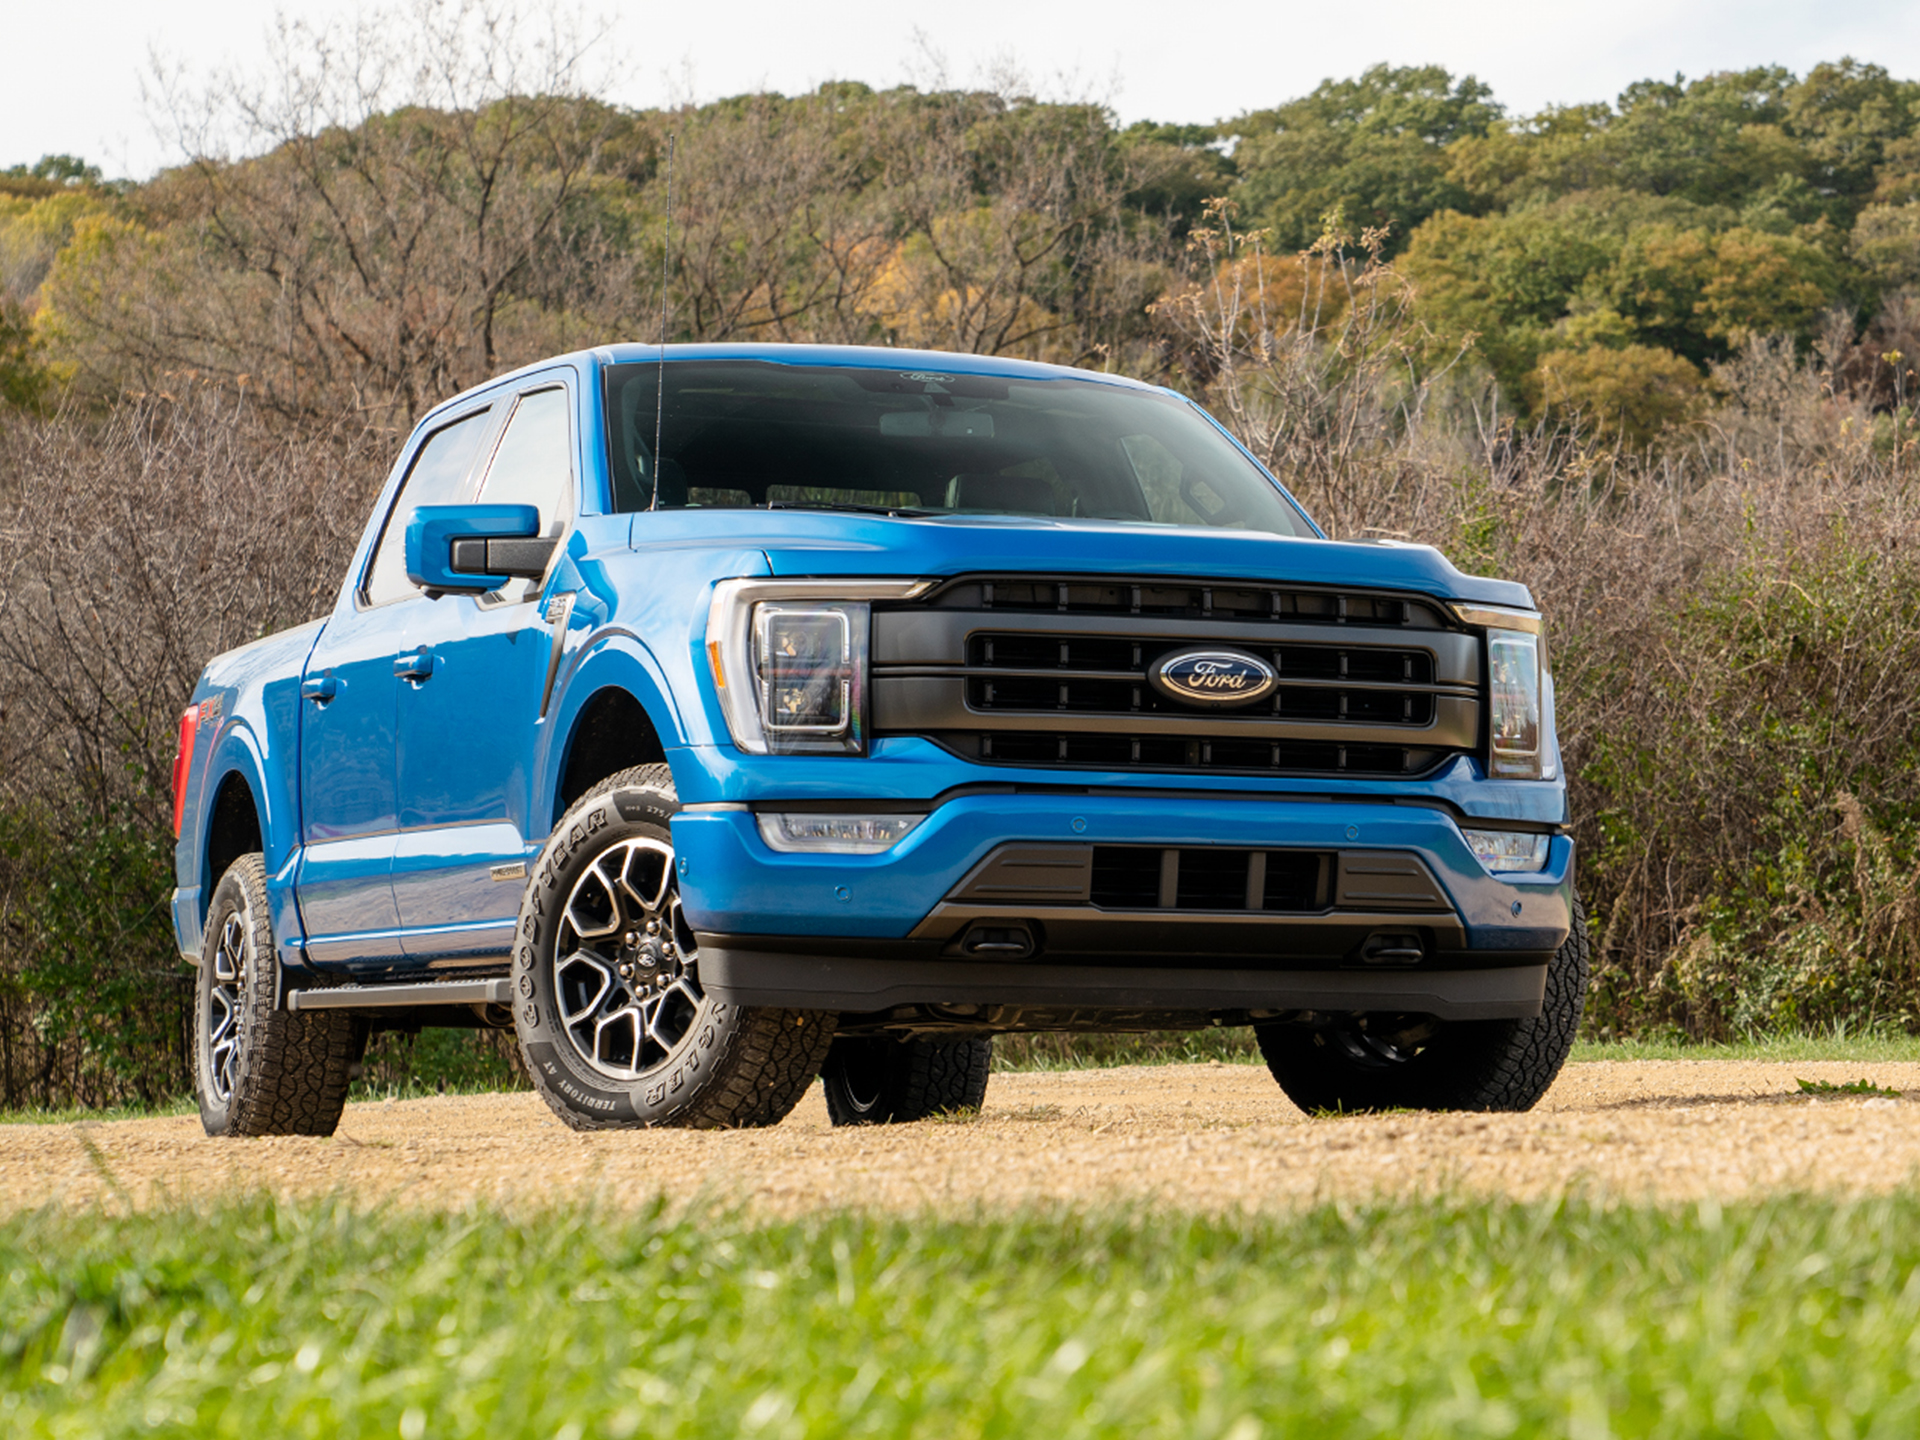 The F-150 will perform on or off-road.